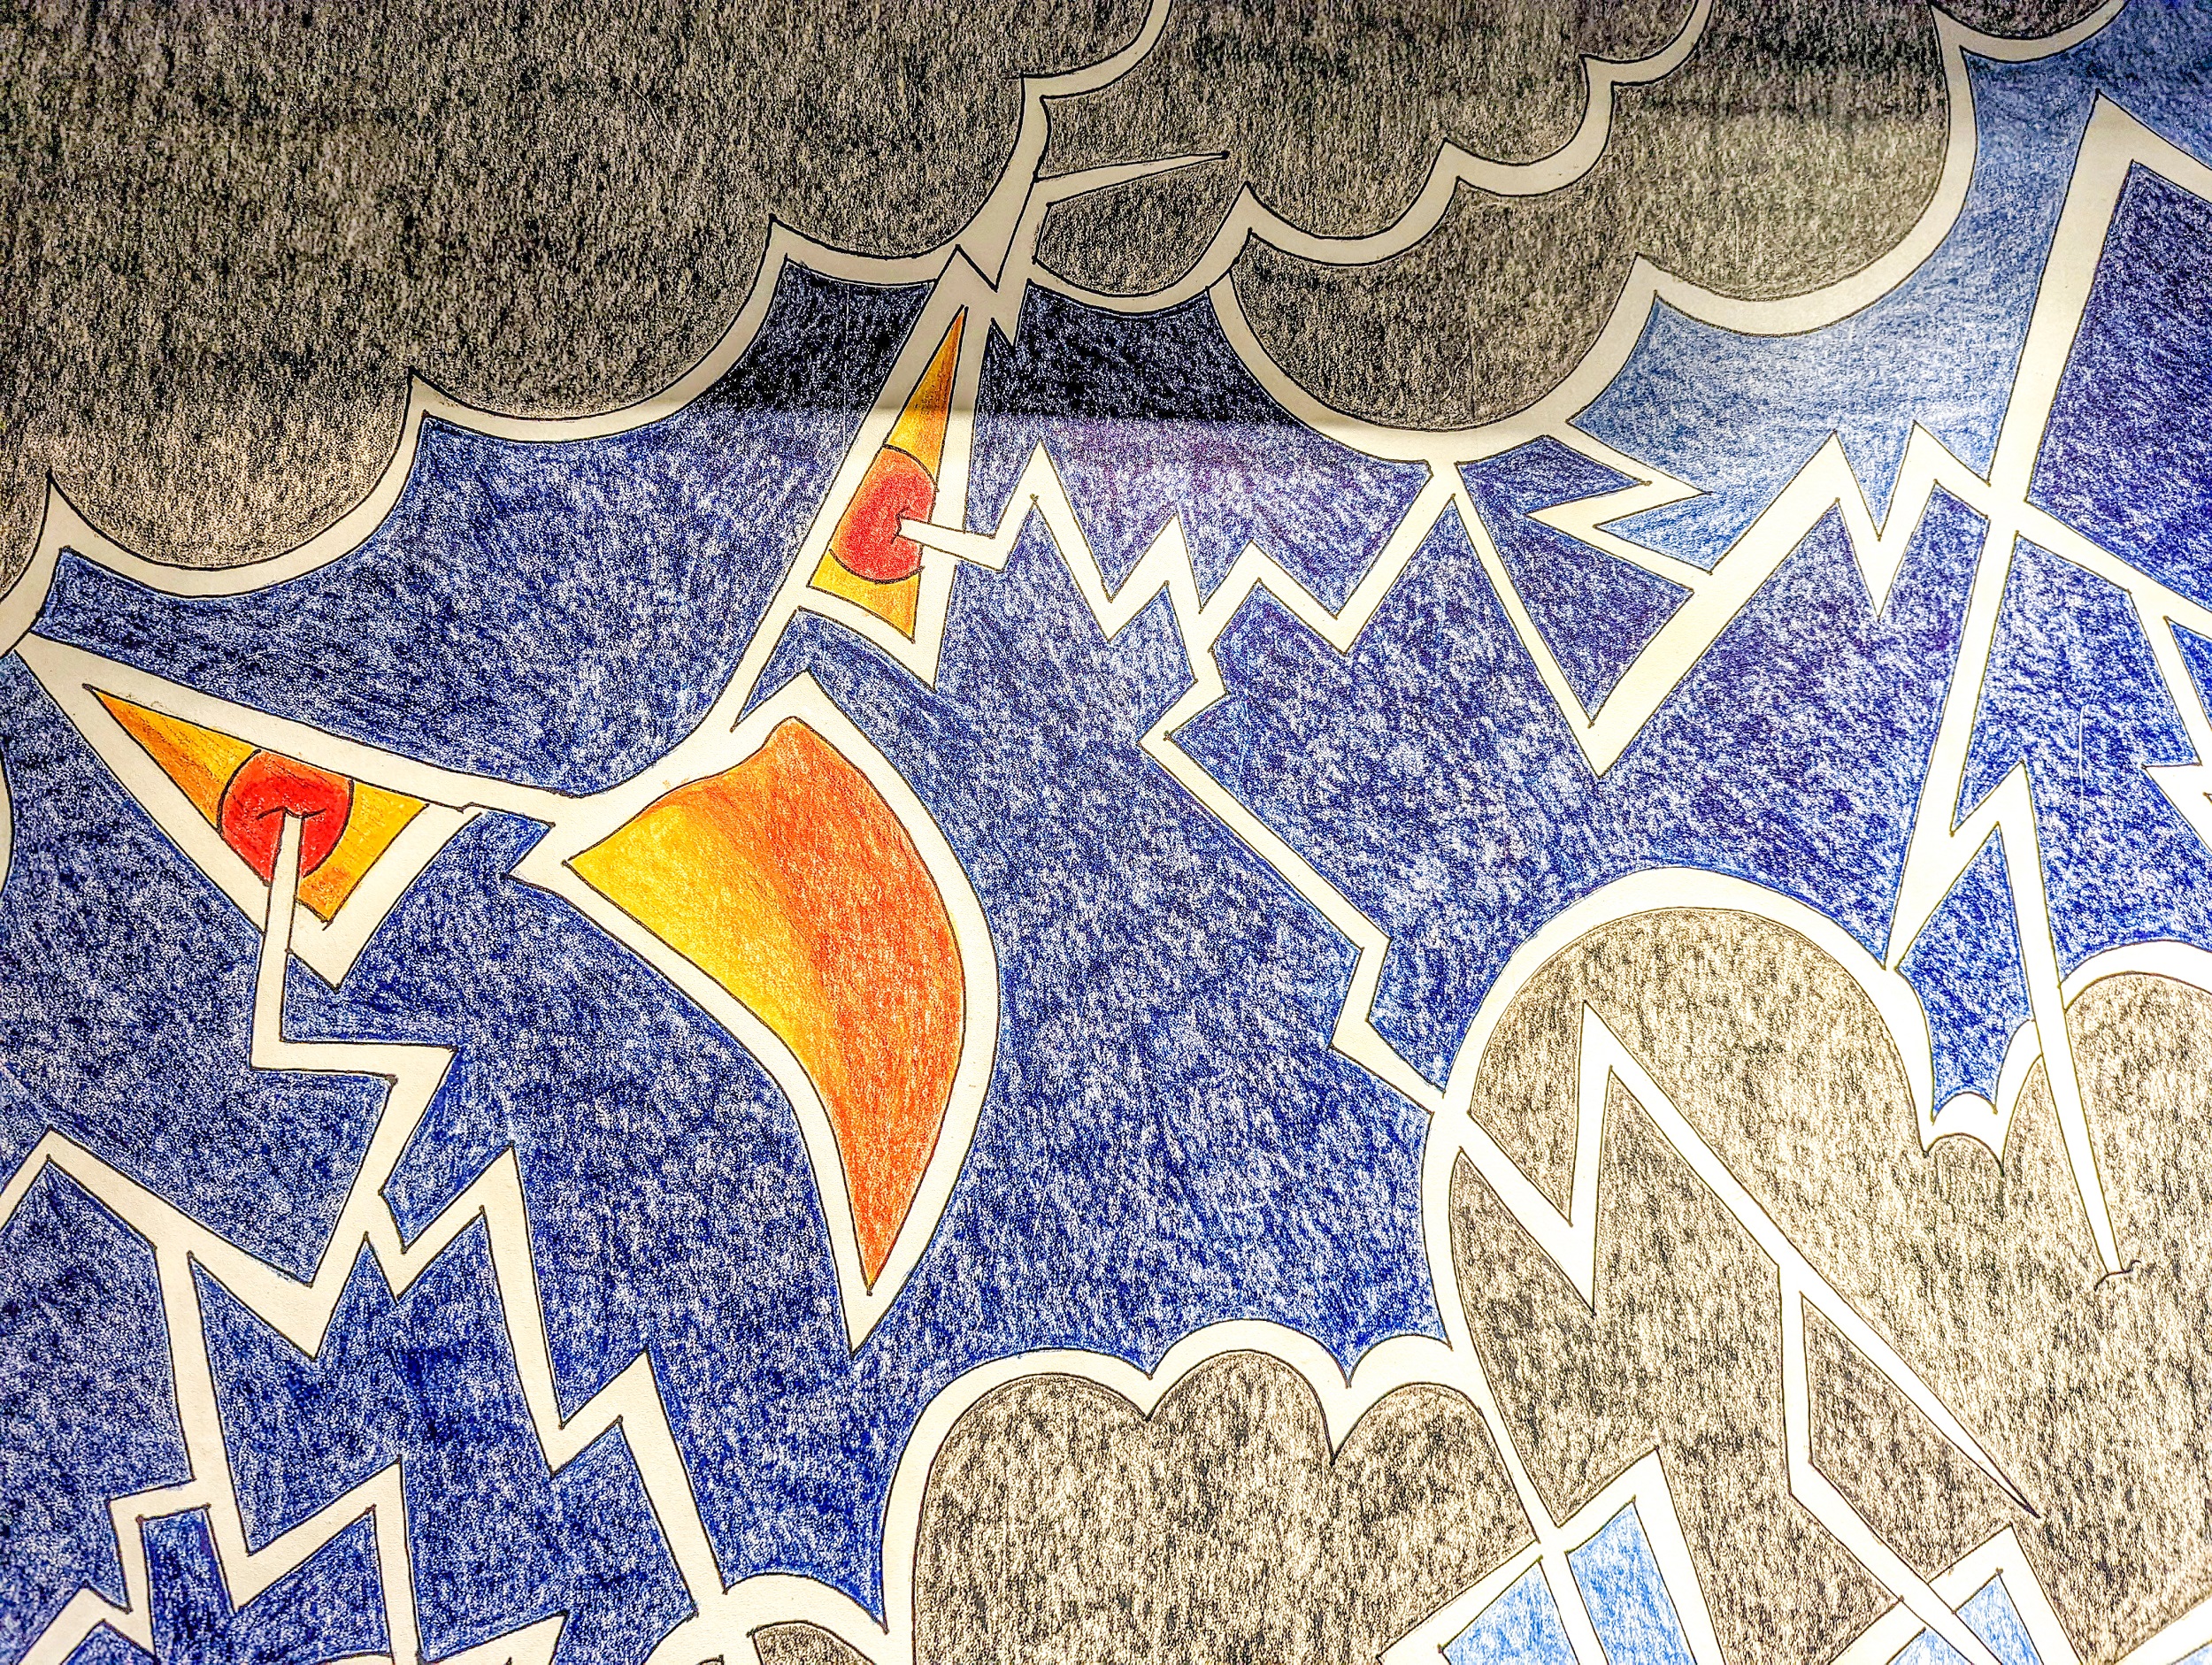 Colorful painting of jagged forms in gray, blue, and orange, suggesting thunder and lightning